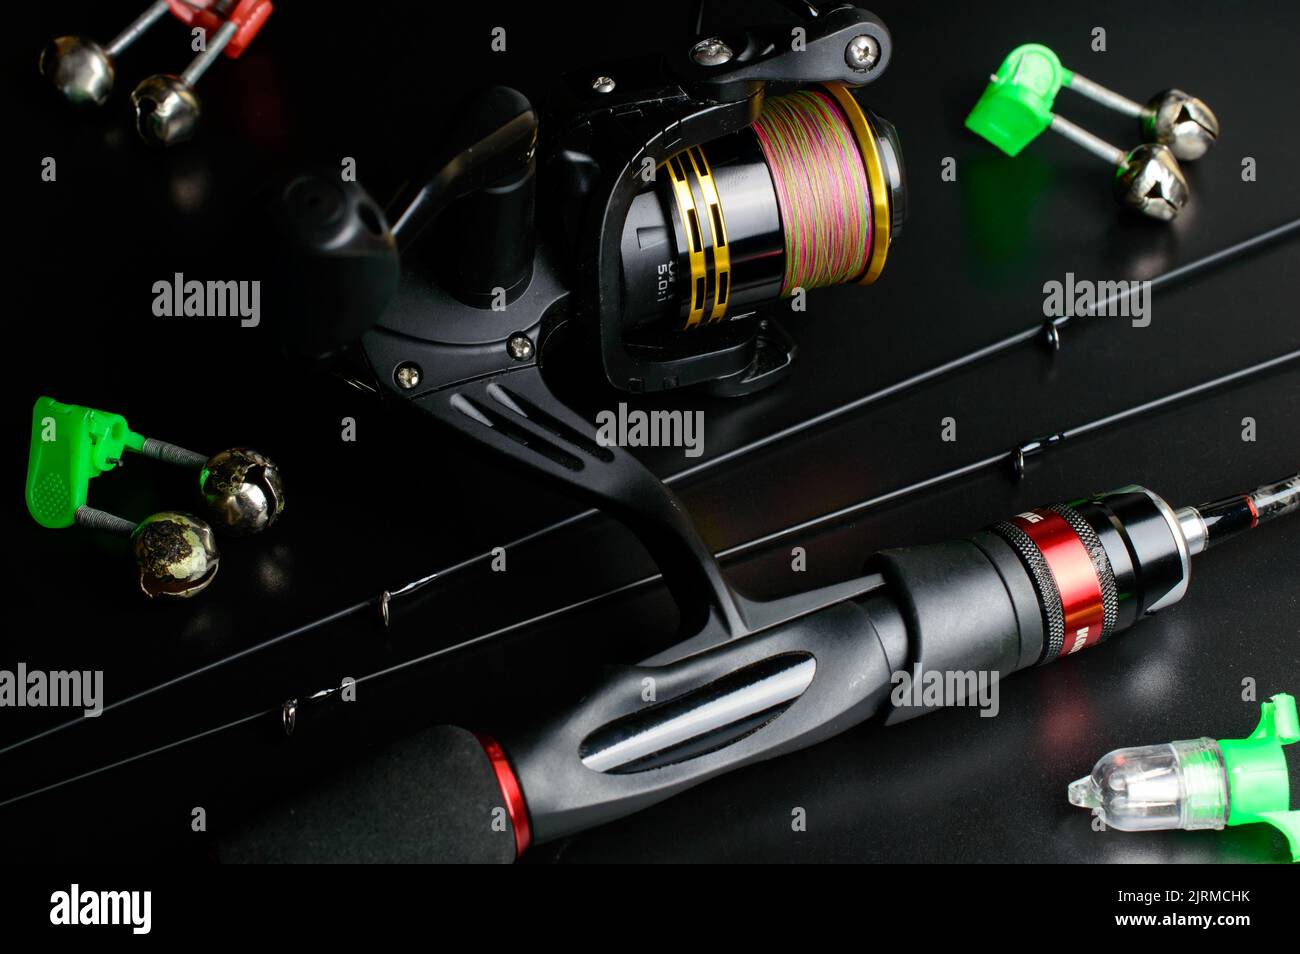 Fishing rod with reel and extra tips on a black background with small green bells. Stock Photo